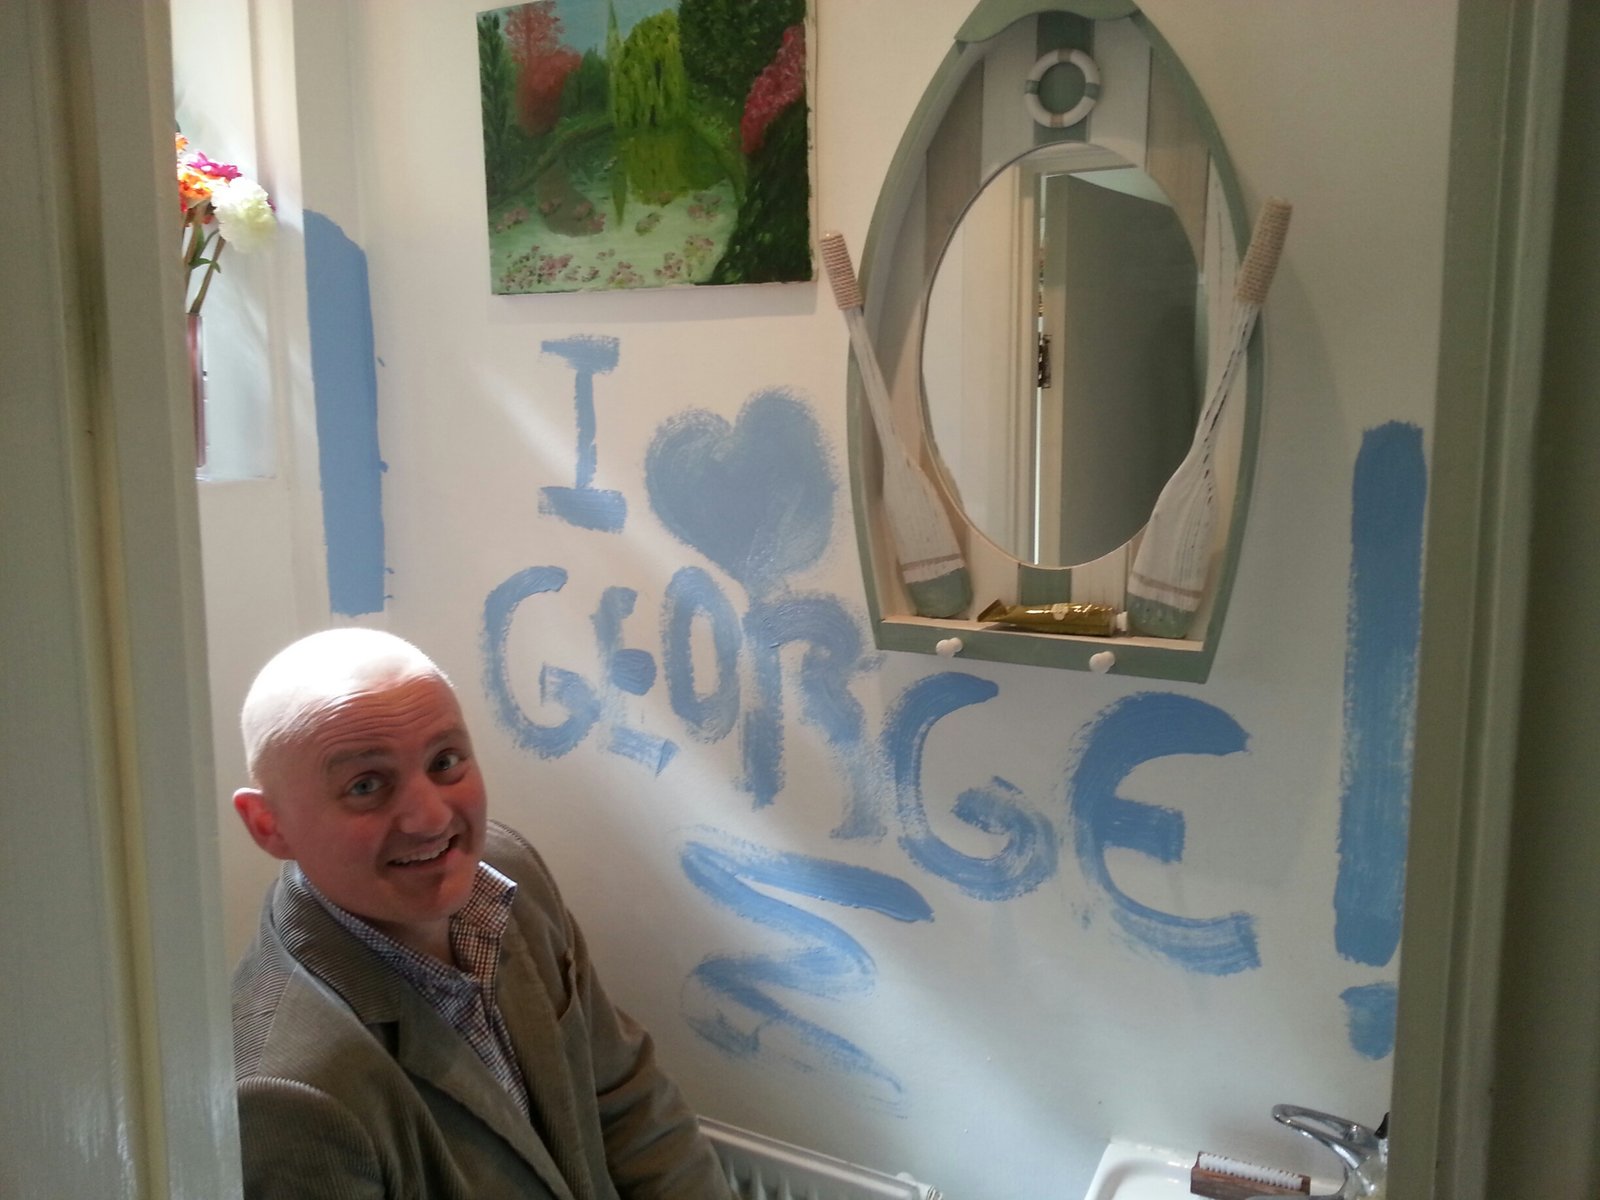 George in the bathroom, with 'I love George' painted on the wall